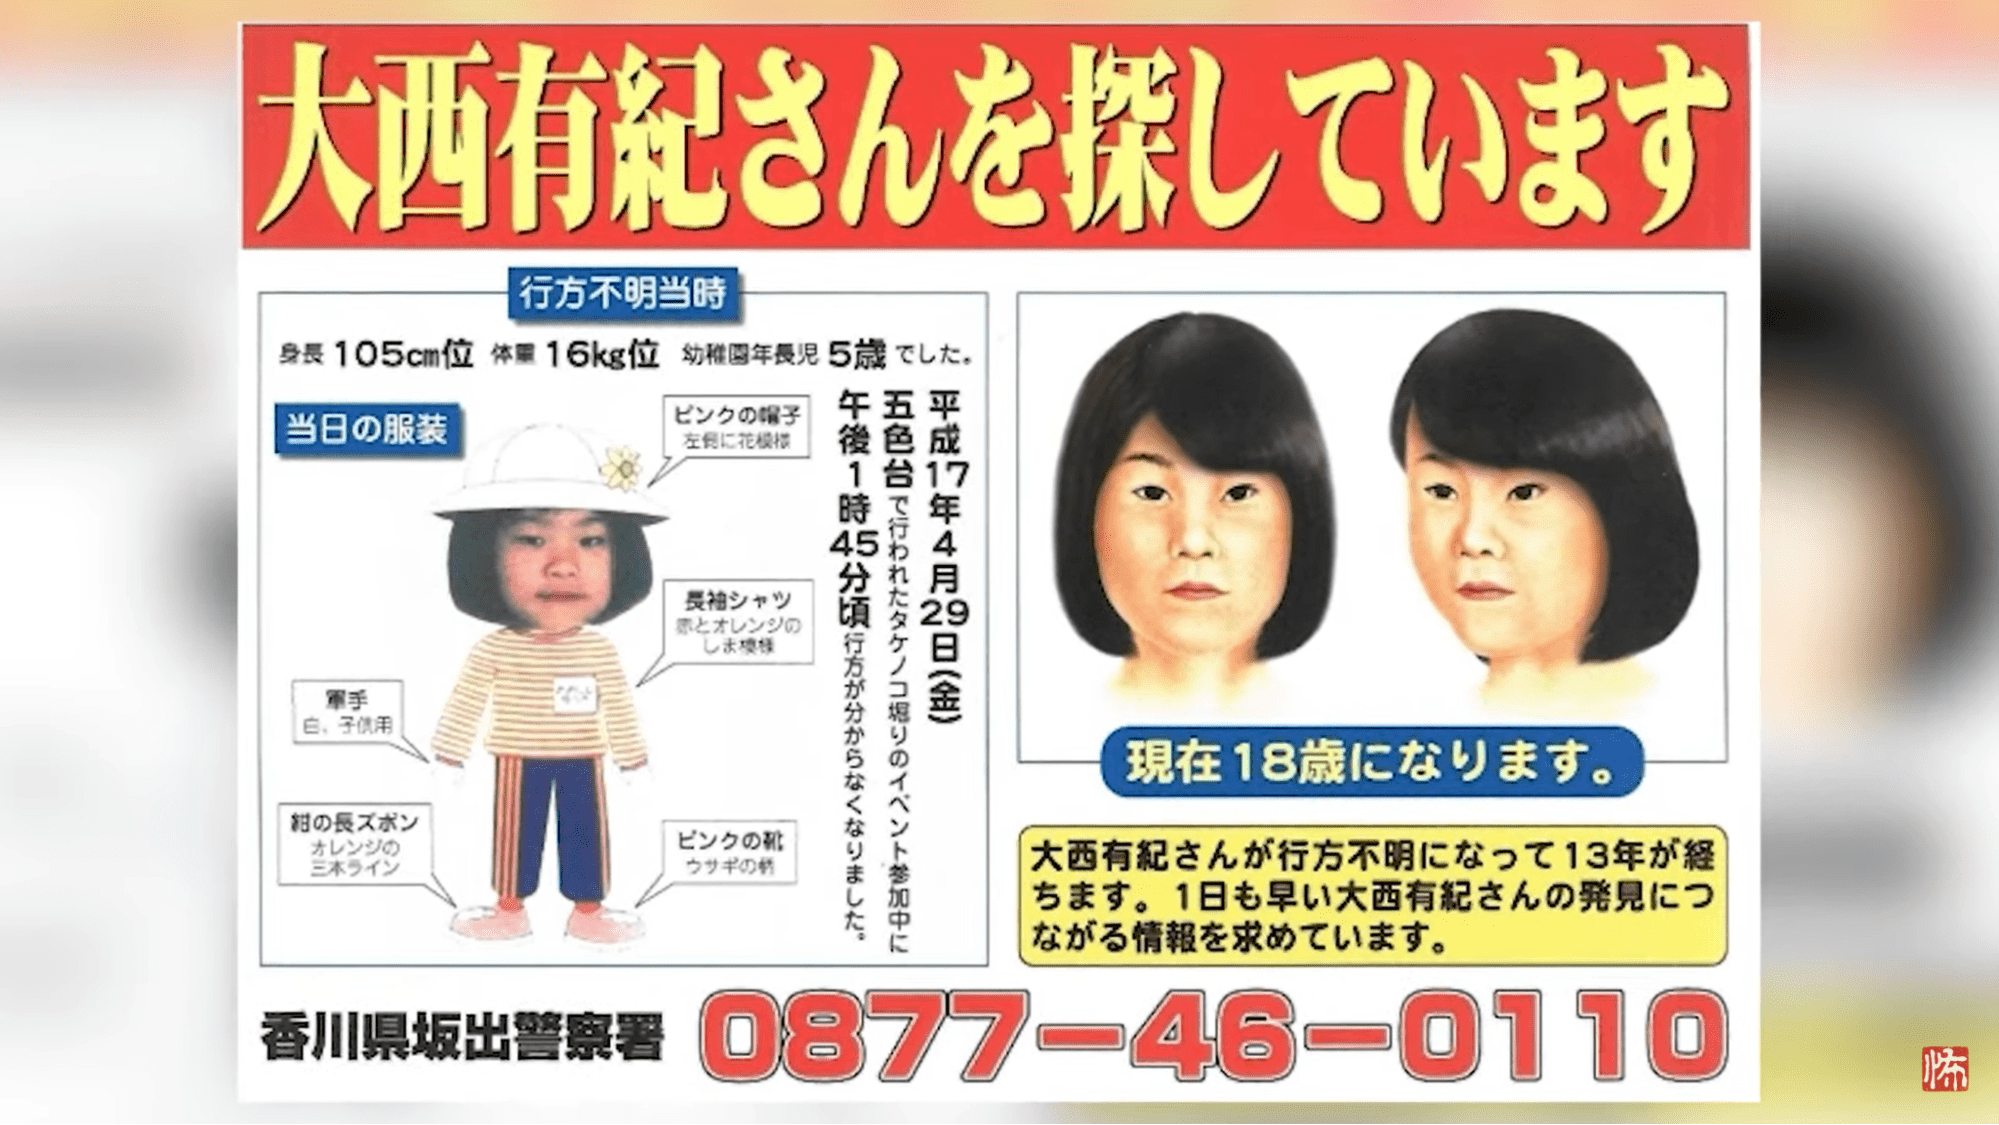 unsolved mysteries in Japan - missing girl